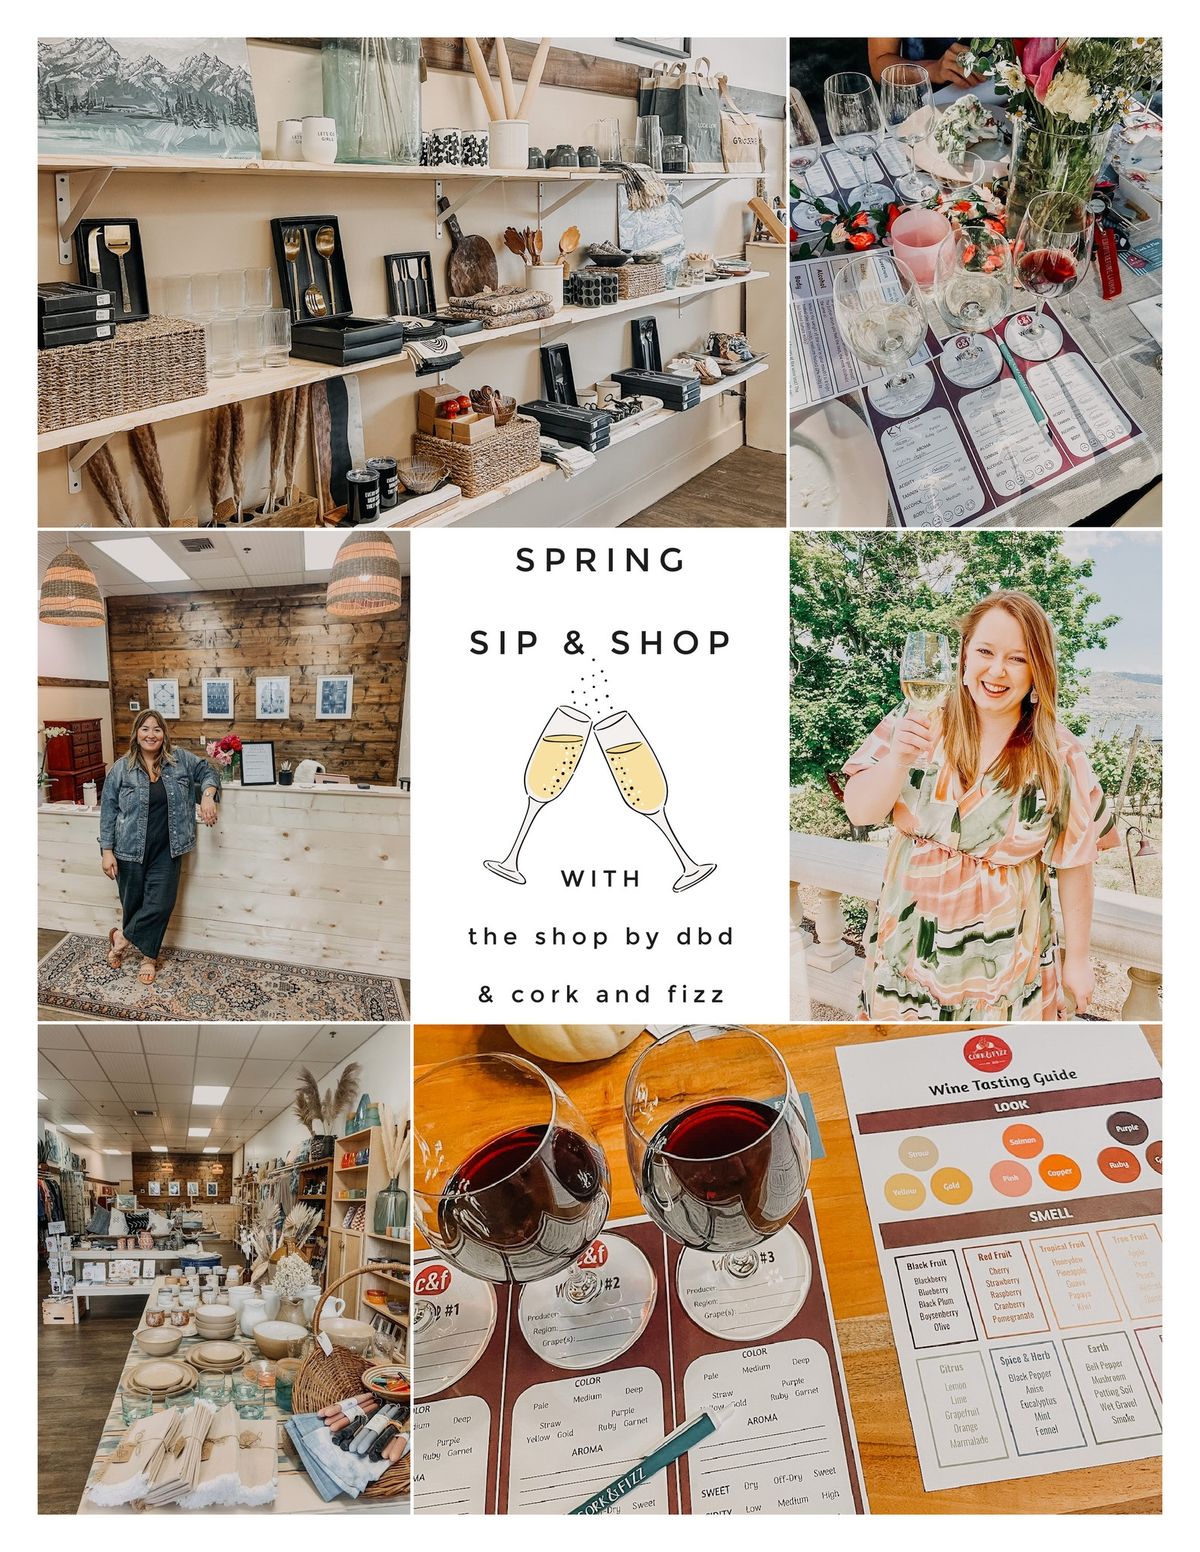 SPRING SIP AND SHOP